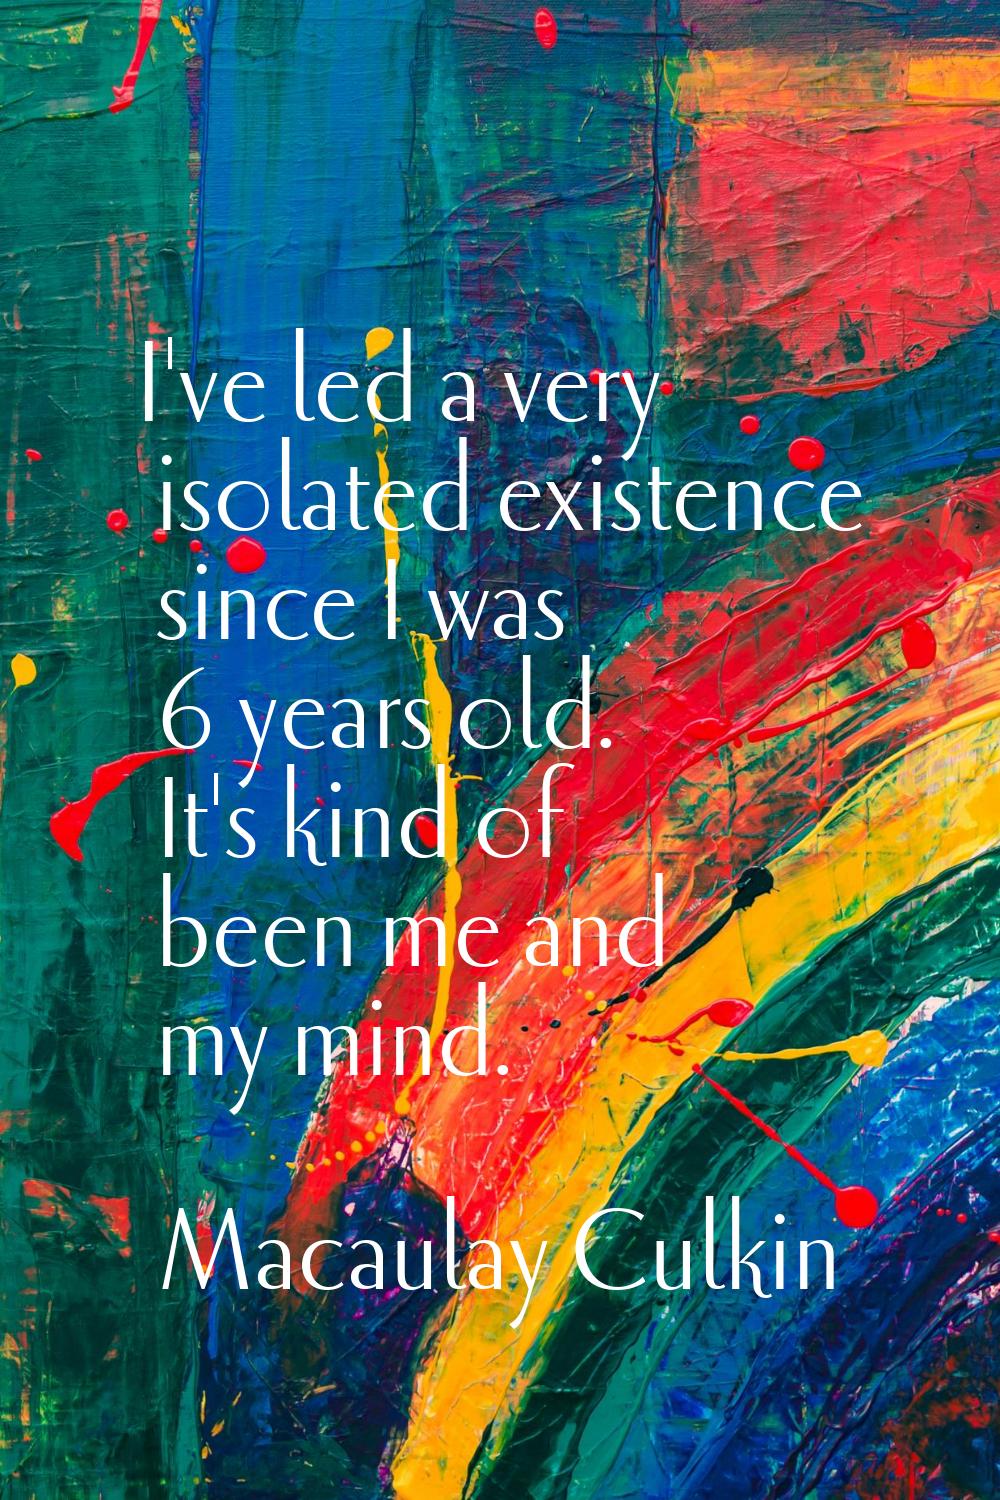 I've led a very isolated existence since I was 6 years old. It's kind of been me and my mind.